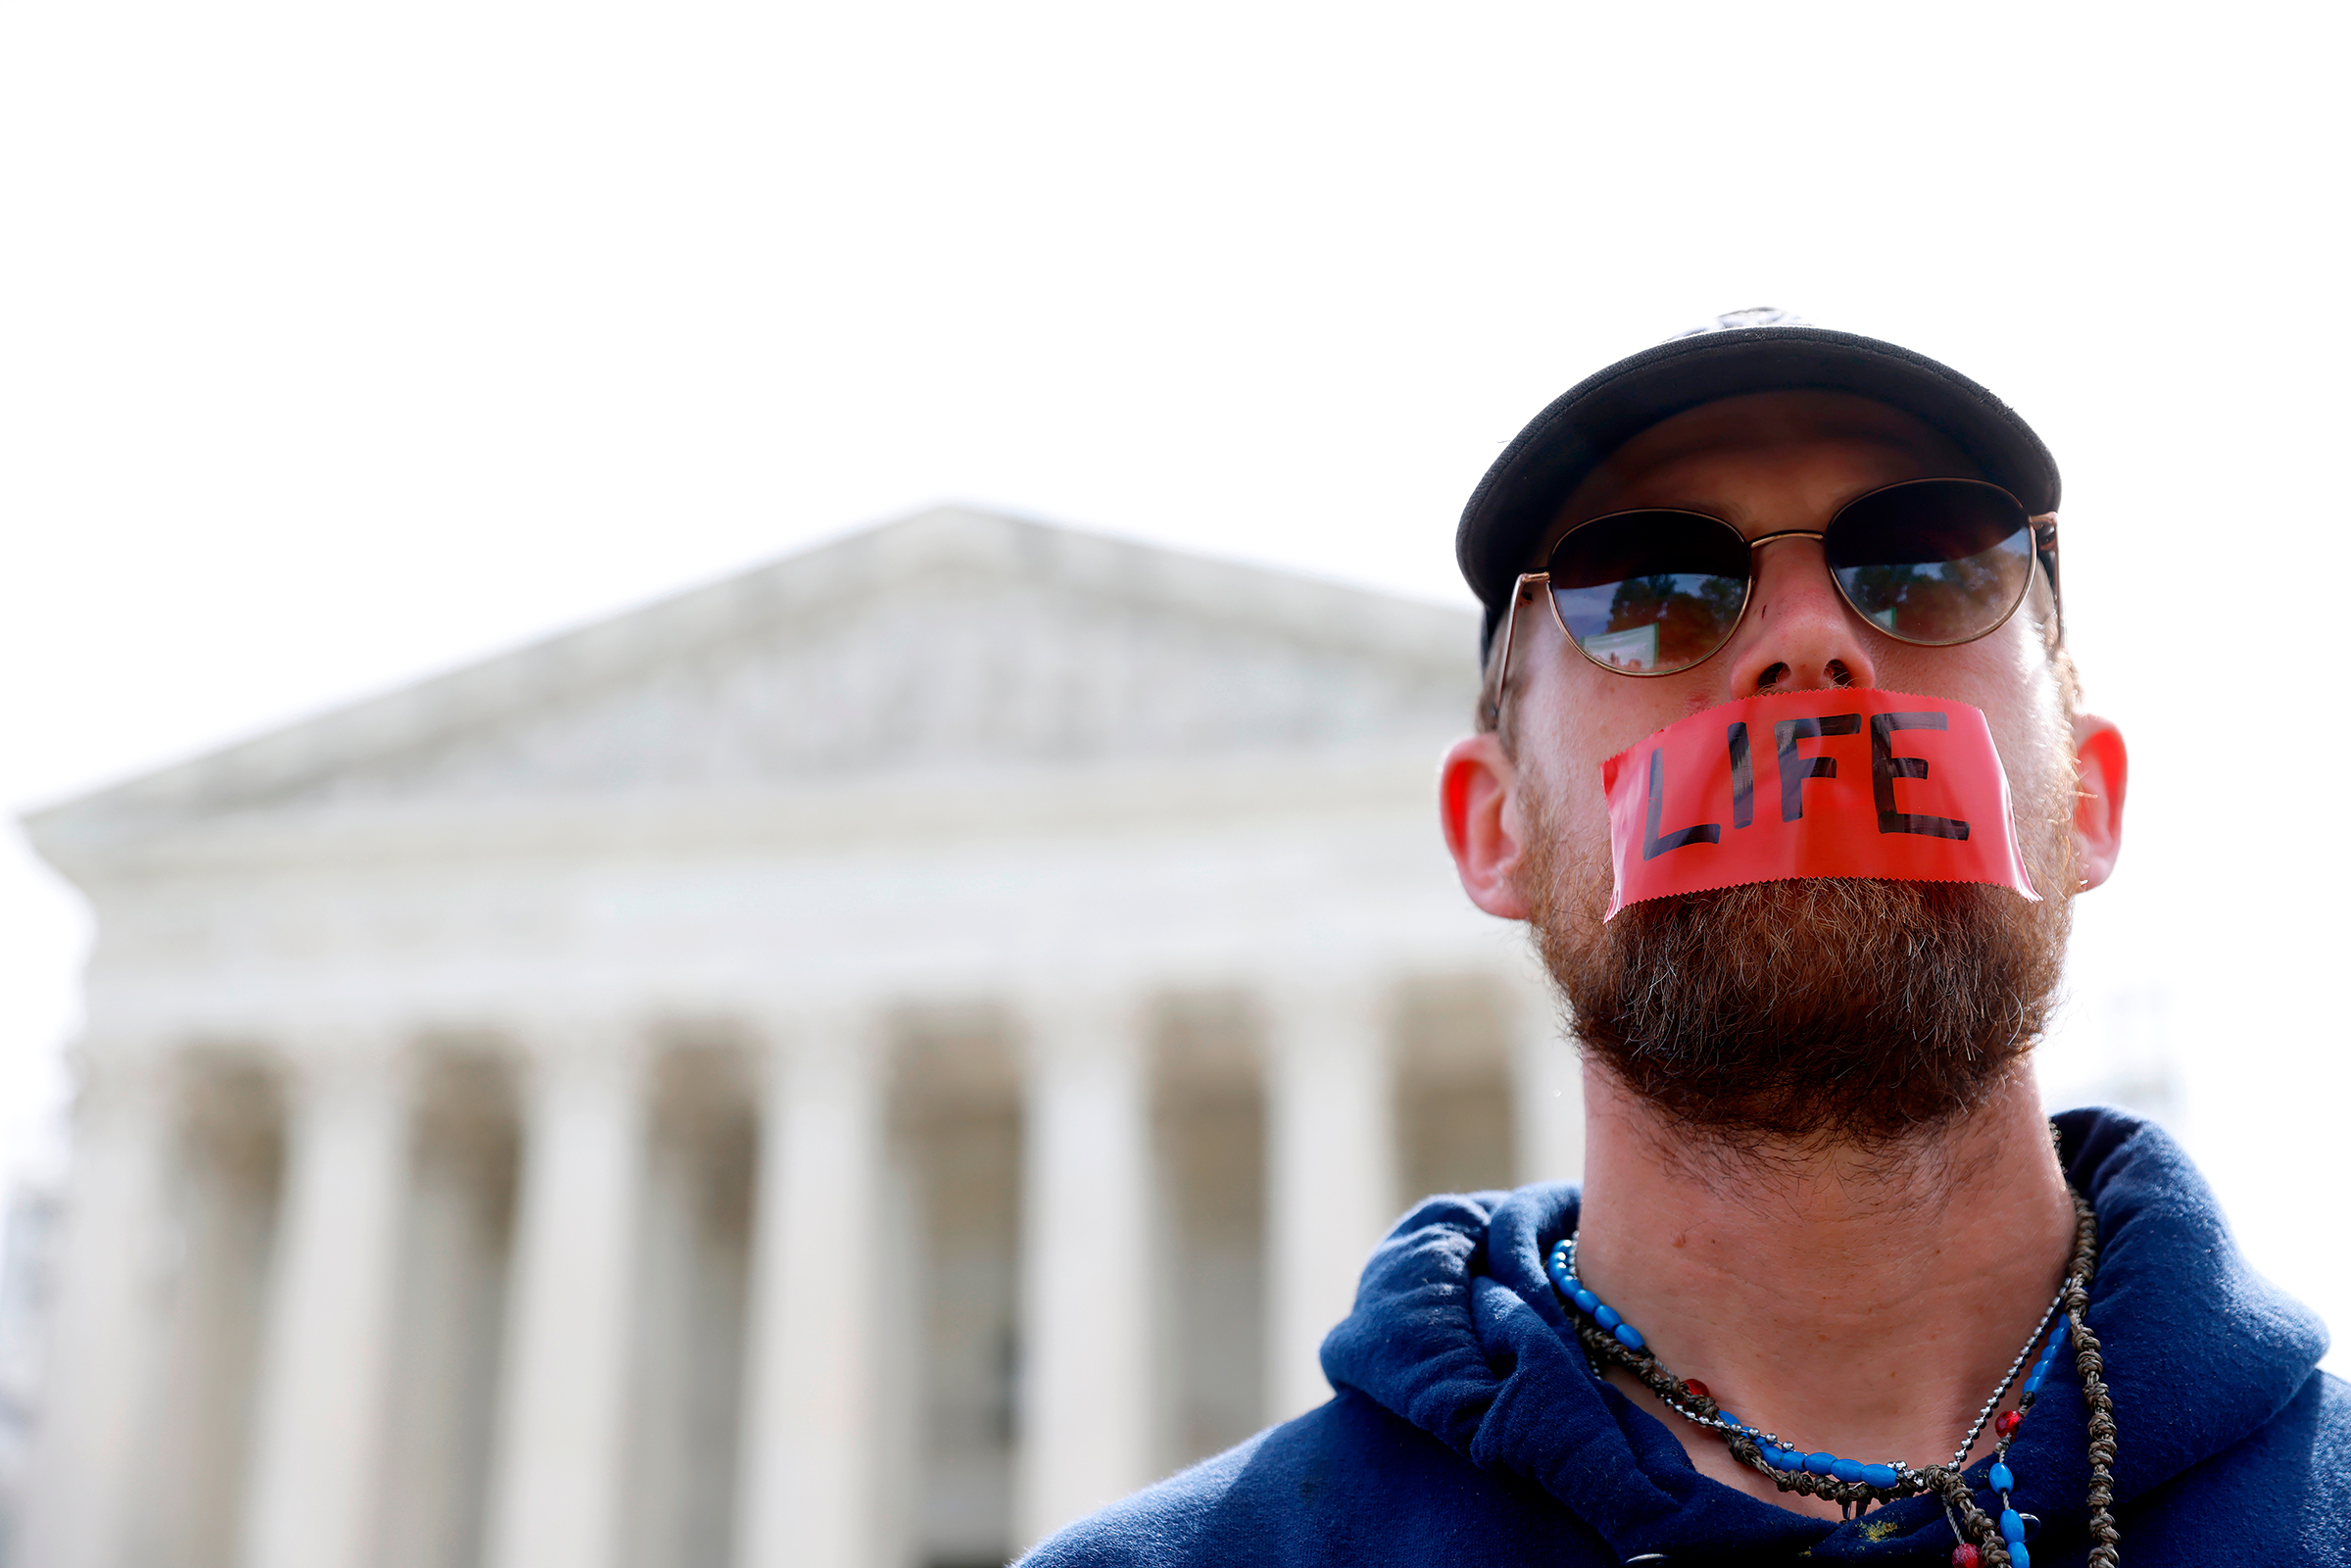 A demonstrator with the word "LIFE" written on tape covering his mouth stands outside the US Supreme Court on Wednesday.